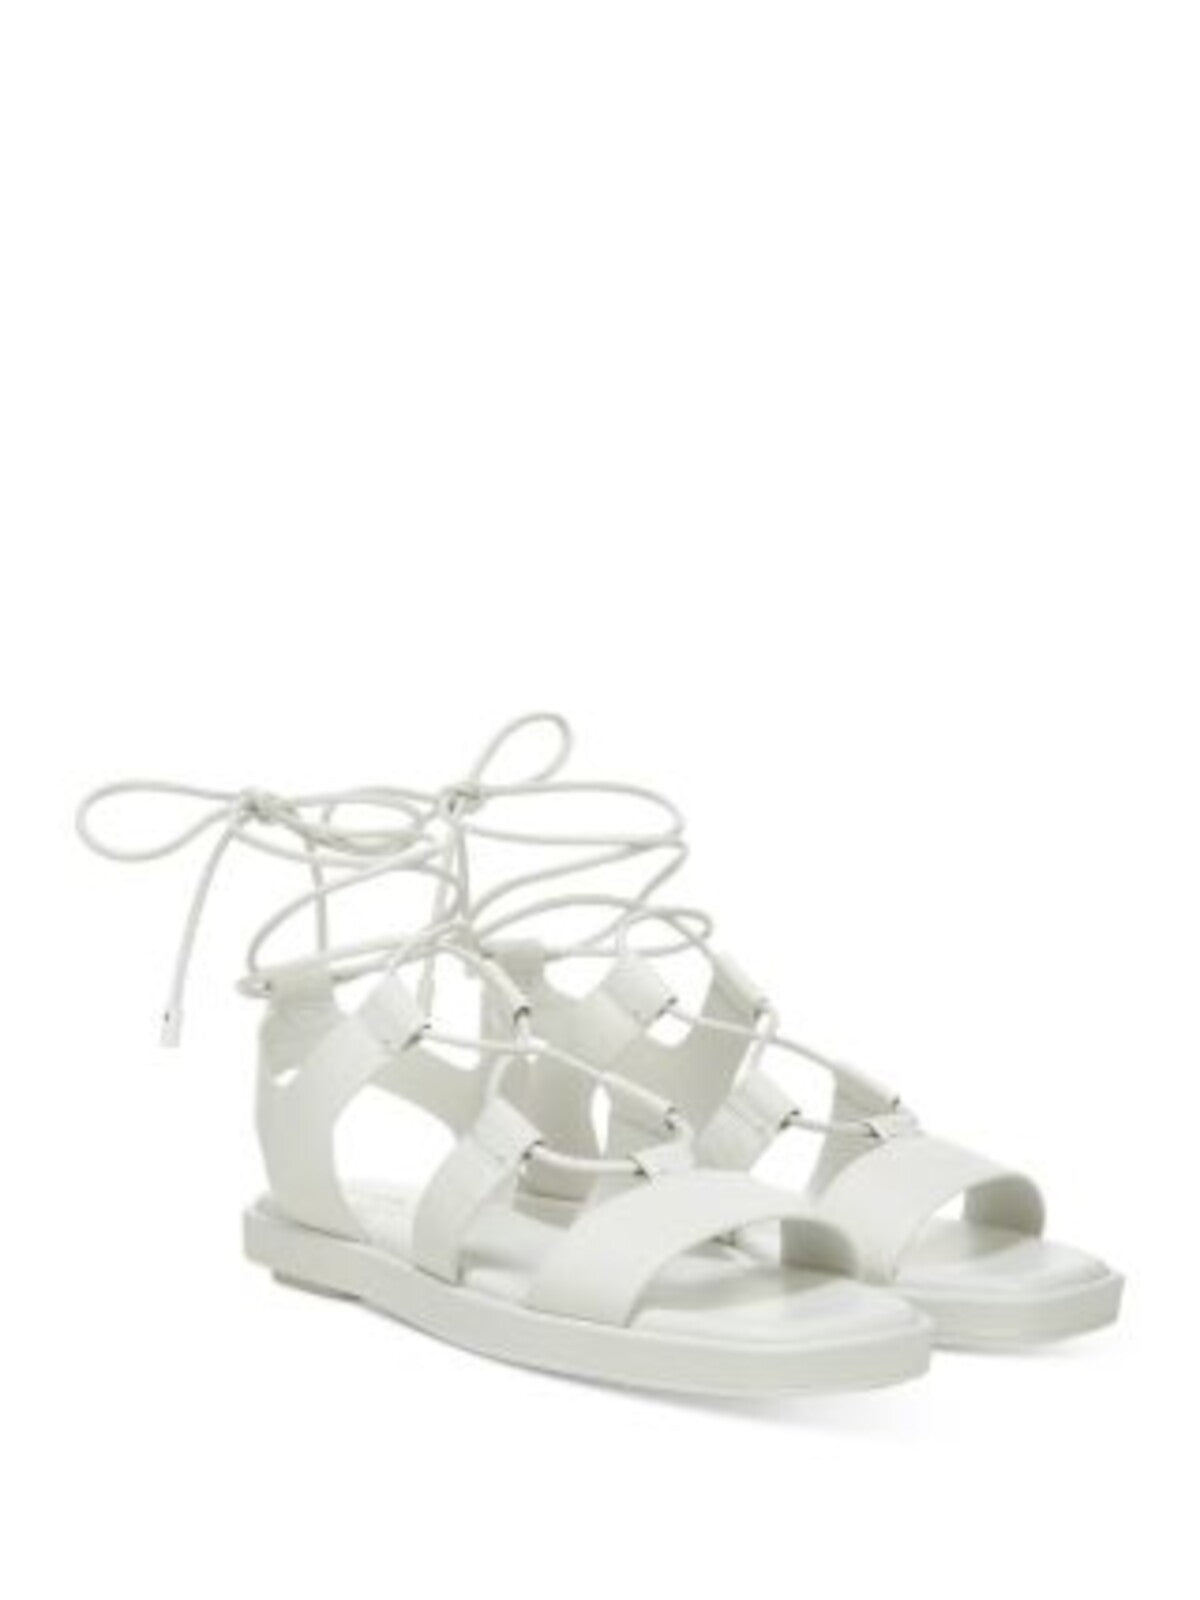 VINCE. Womens White Cushioned Strappy Rockwell Square Toe Platform Lace-Up Leather Sandals Shoes 5 M